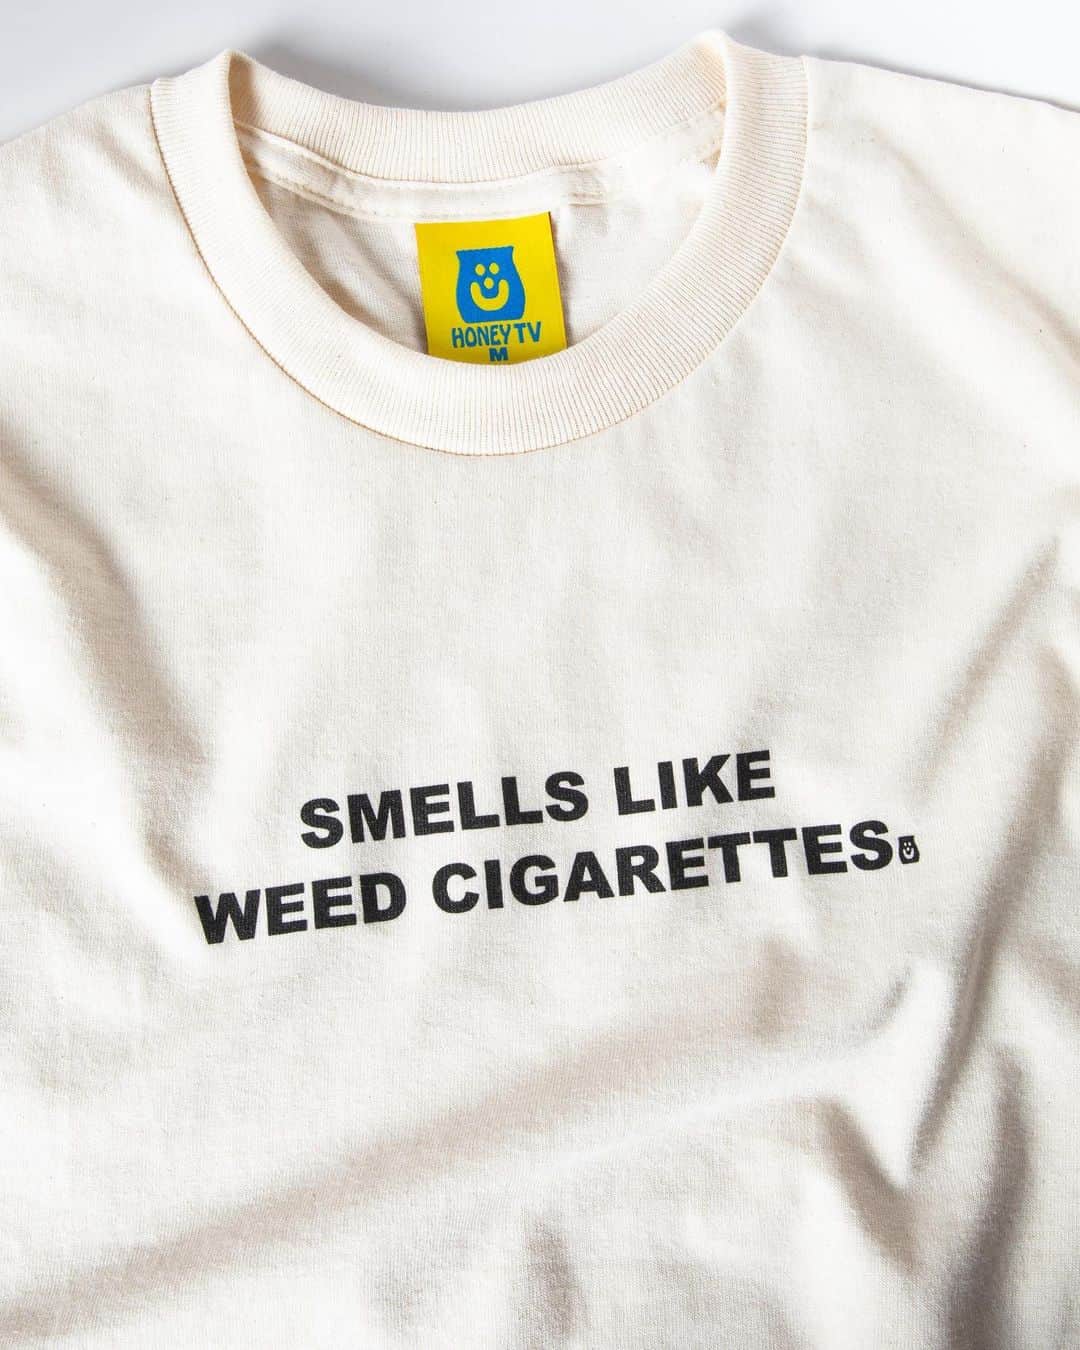 zumiezのインスタグラム：「New tee landing in @zumiez in-store & online today.   “Smells Like Weed Cigarettes” tee based on our weed cigs sticker.   Available now in select Zumiez stores and online.」